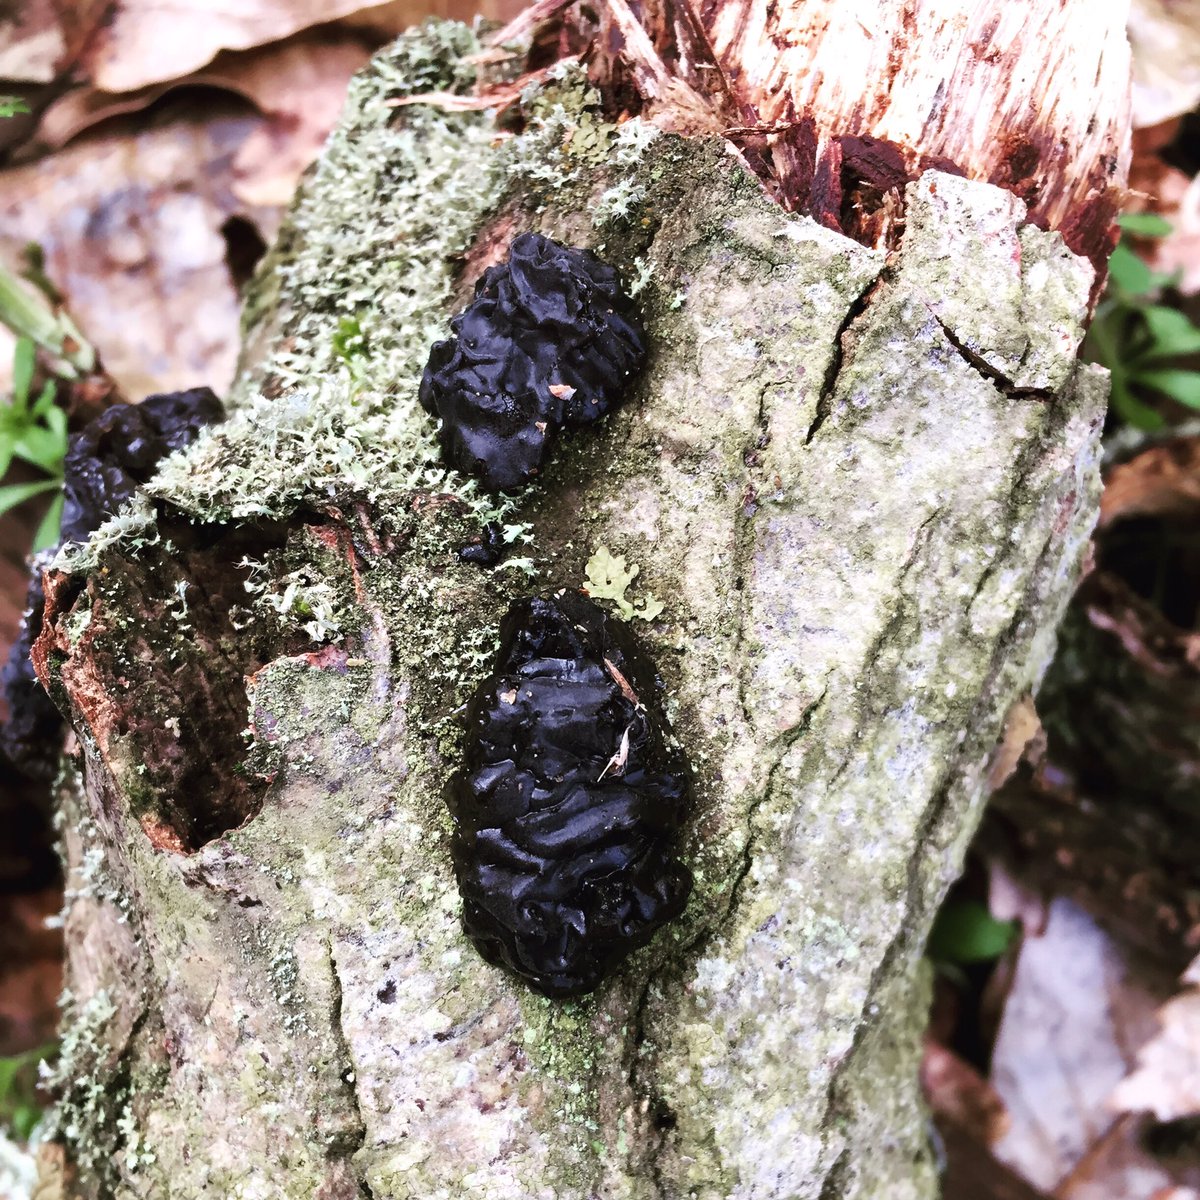 #exidiaplana #witchesbutter in #fordwich #kentnature #fungi #mycology #forestphotography #jellyfungus